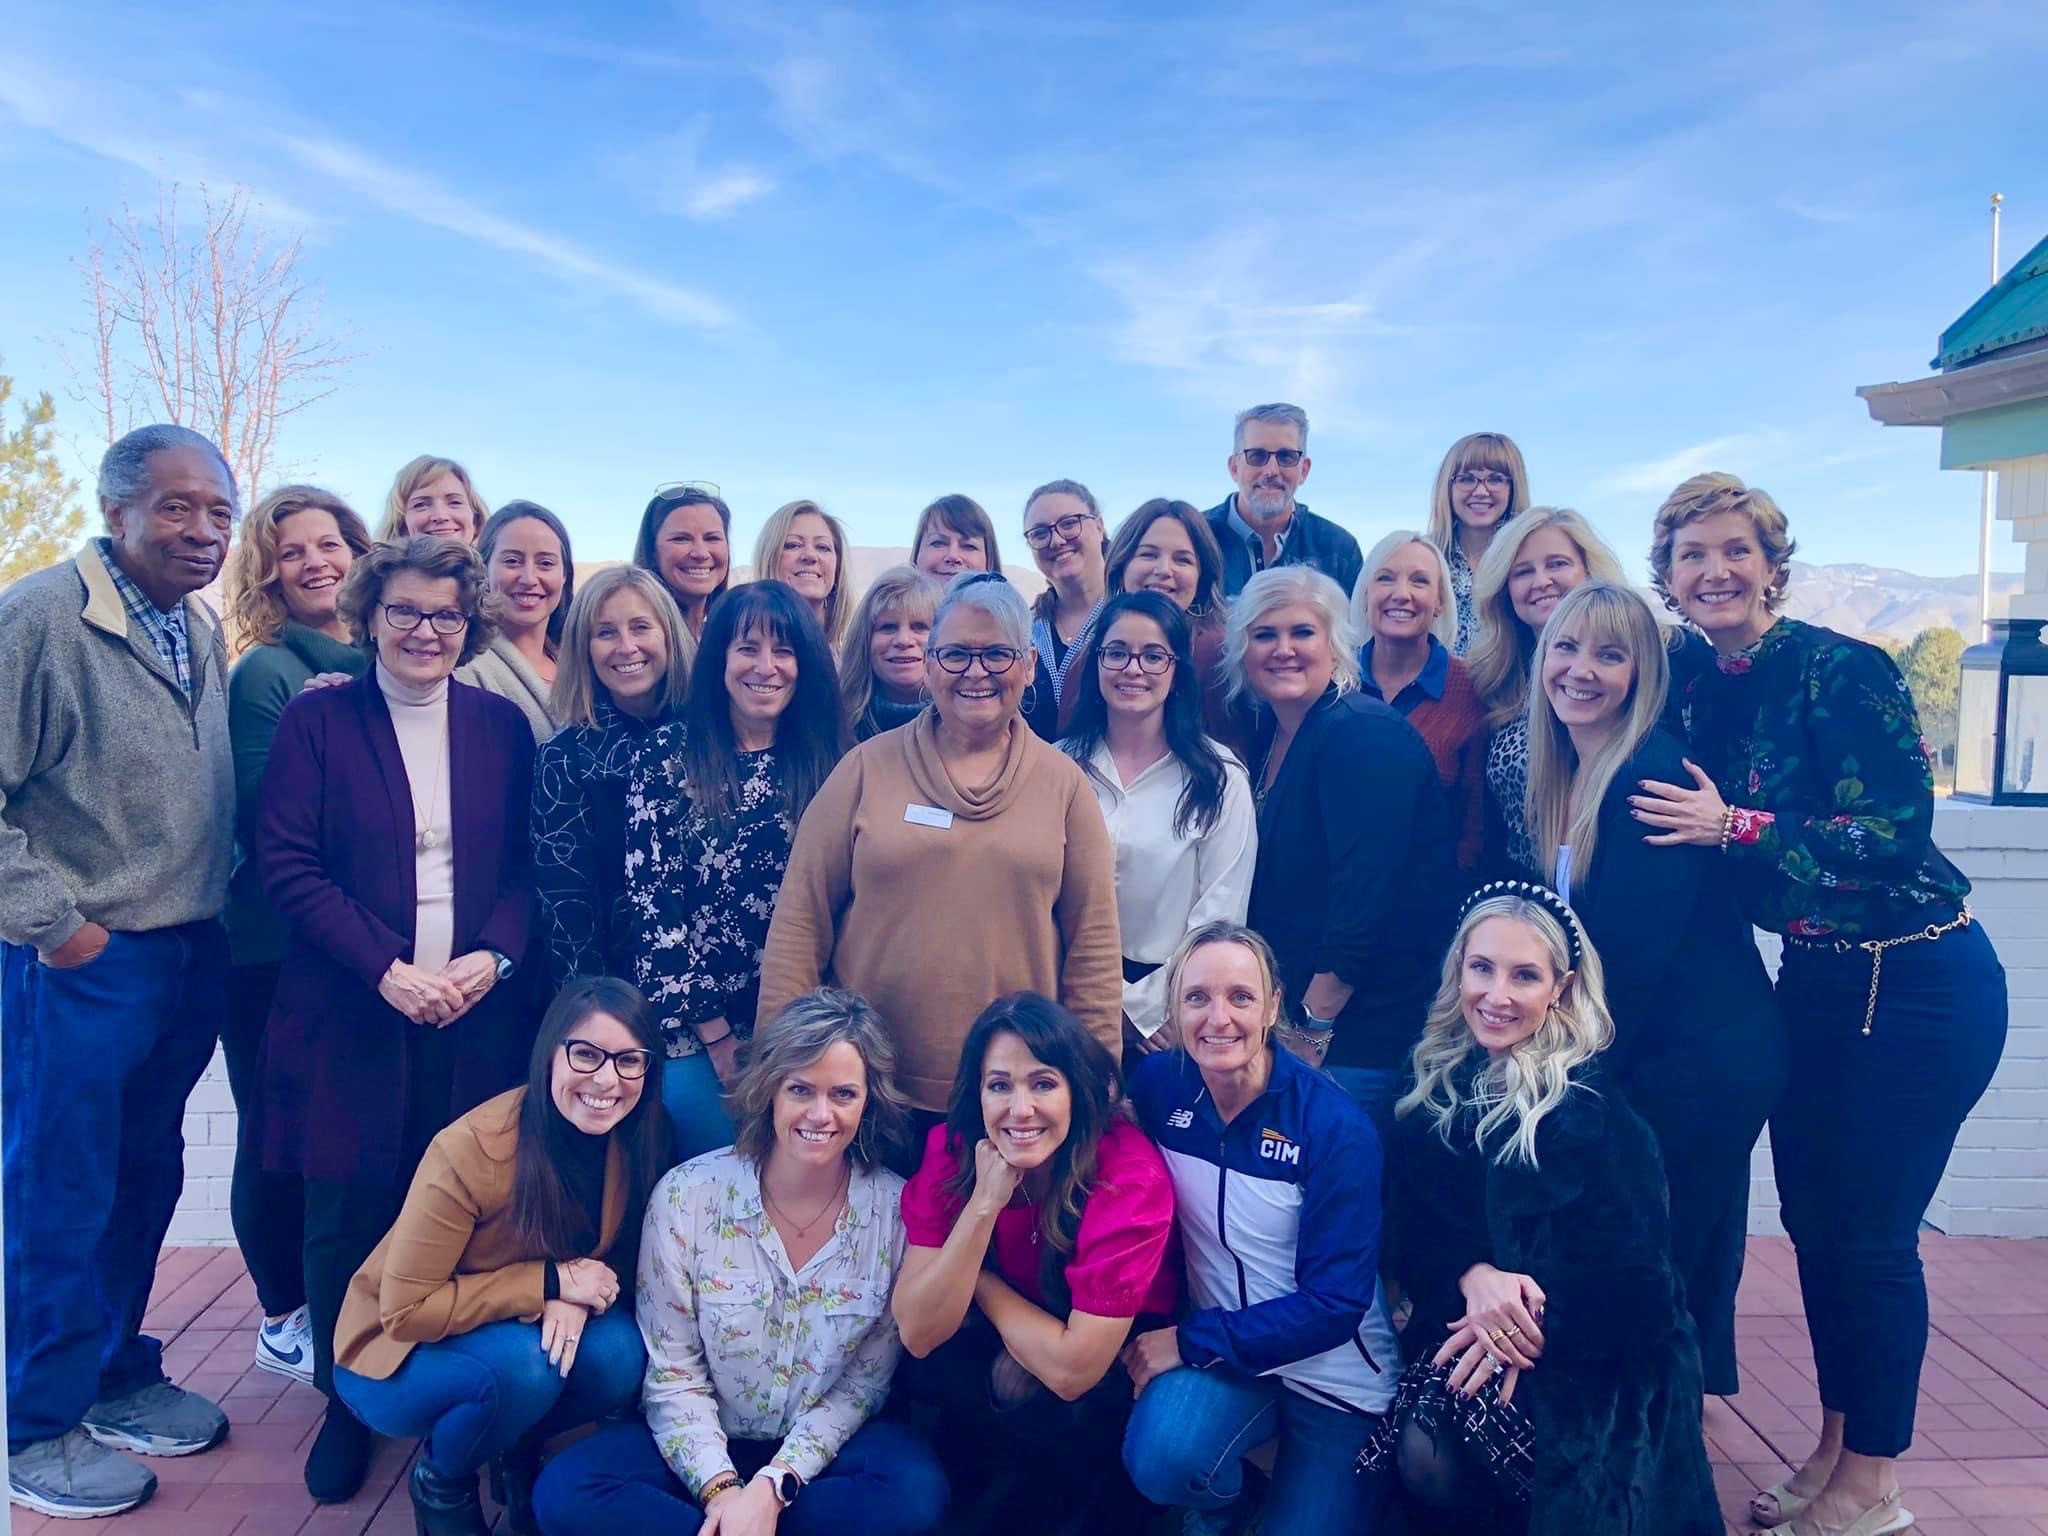 The Nevada Women's Fund 2022 Board of Directors posing for a picture outside